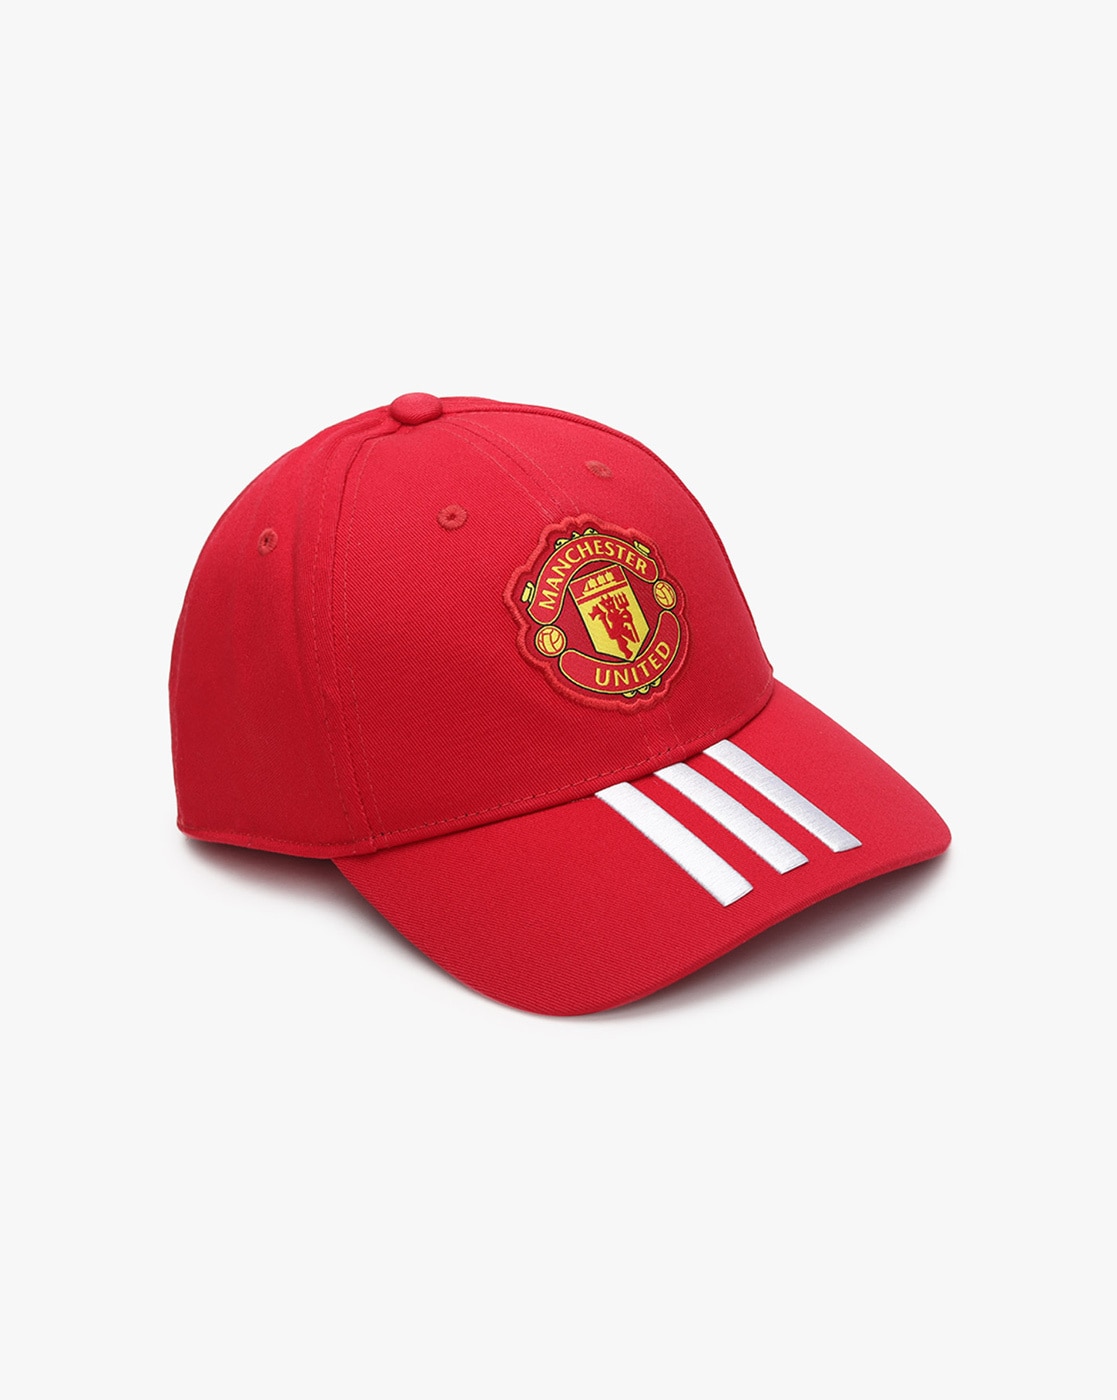 Red Caps Hats for Men by ADIDAS | Ajio.com